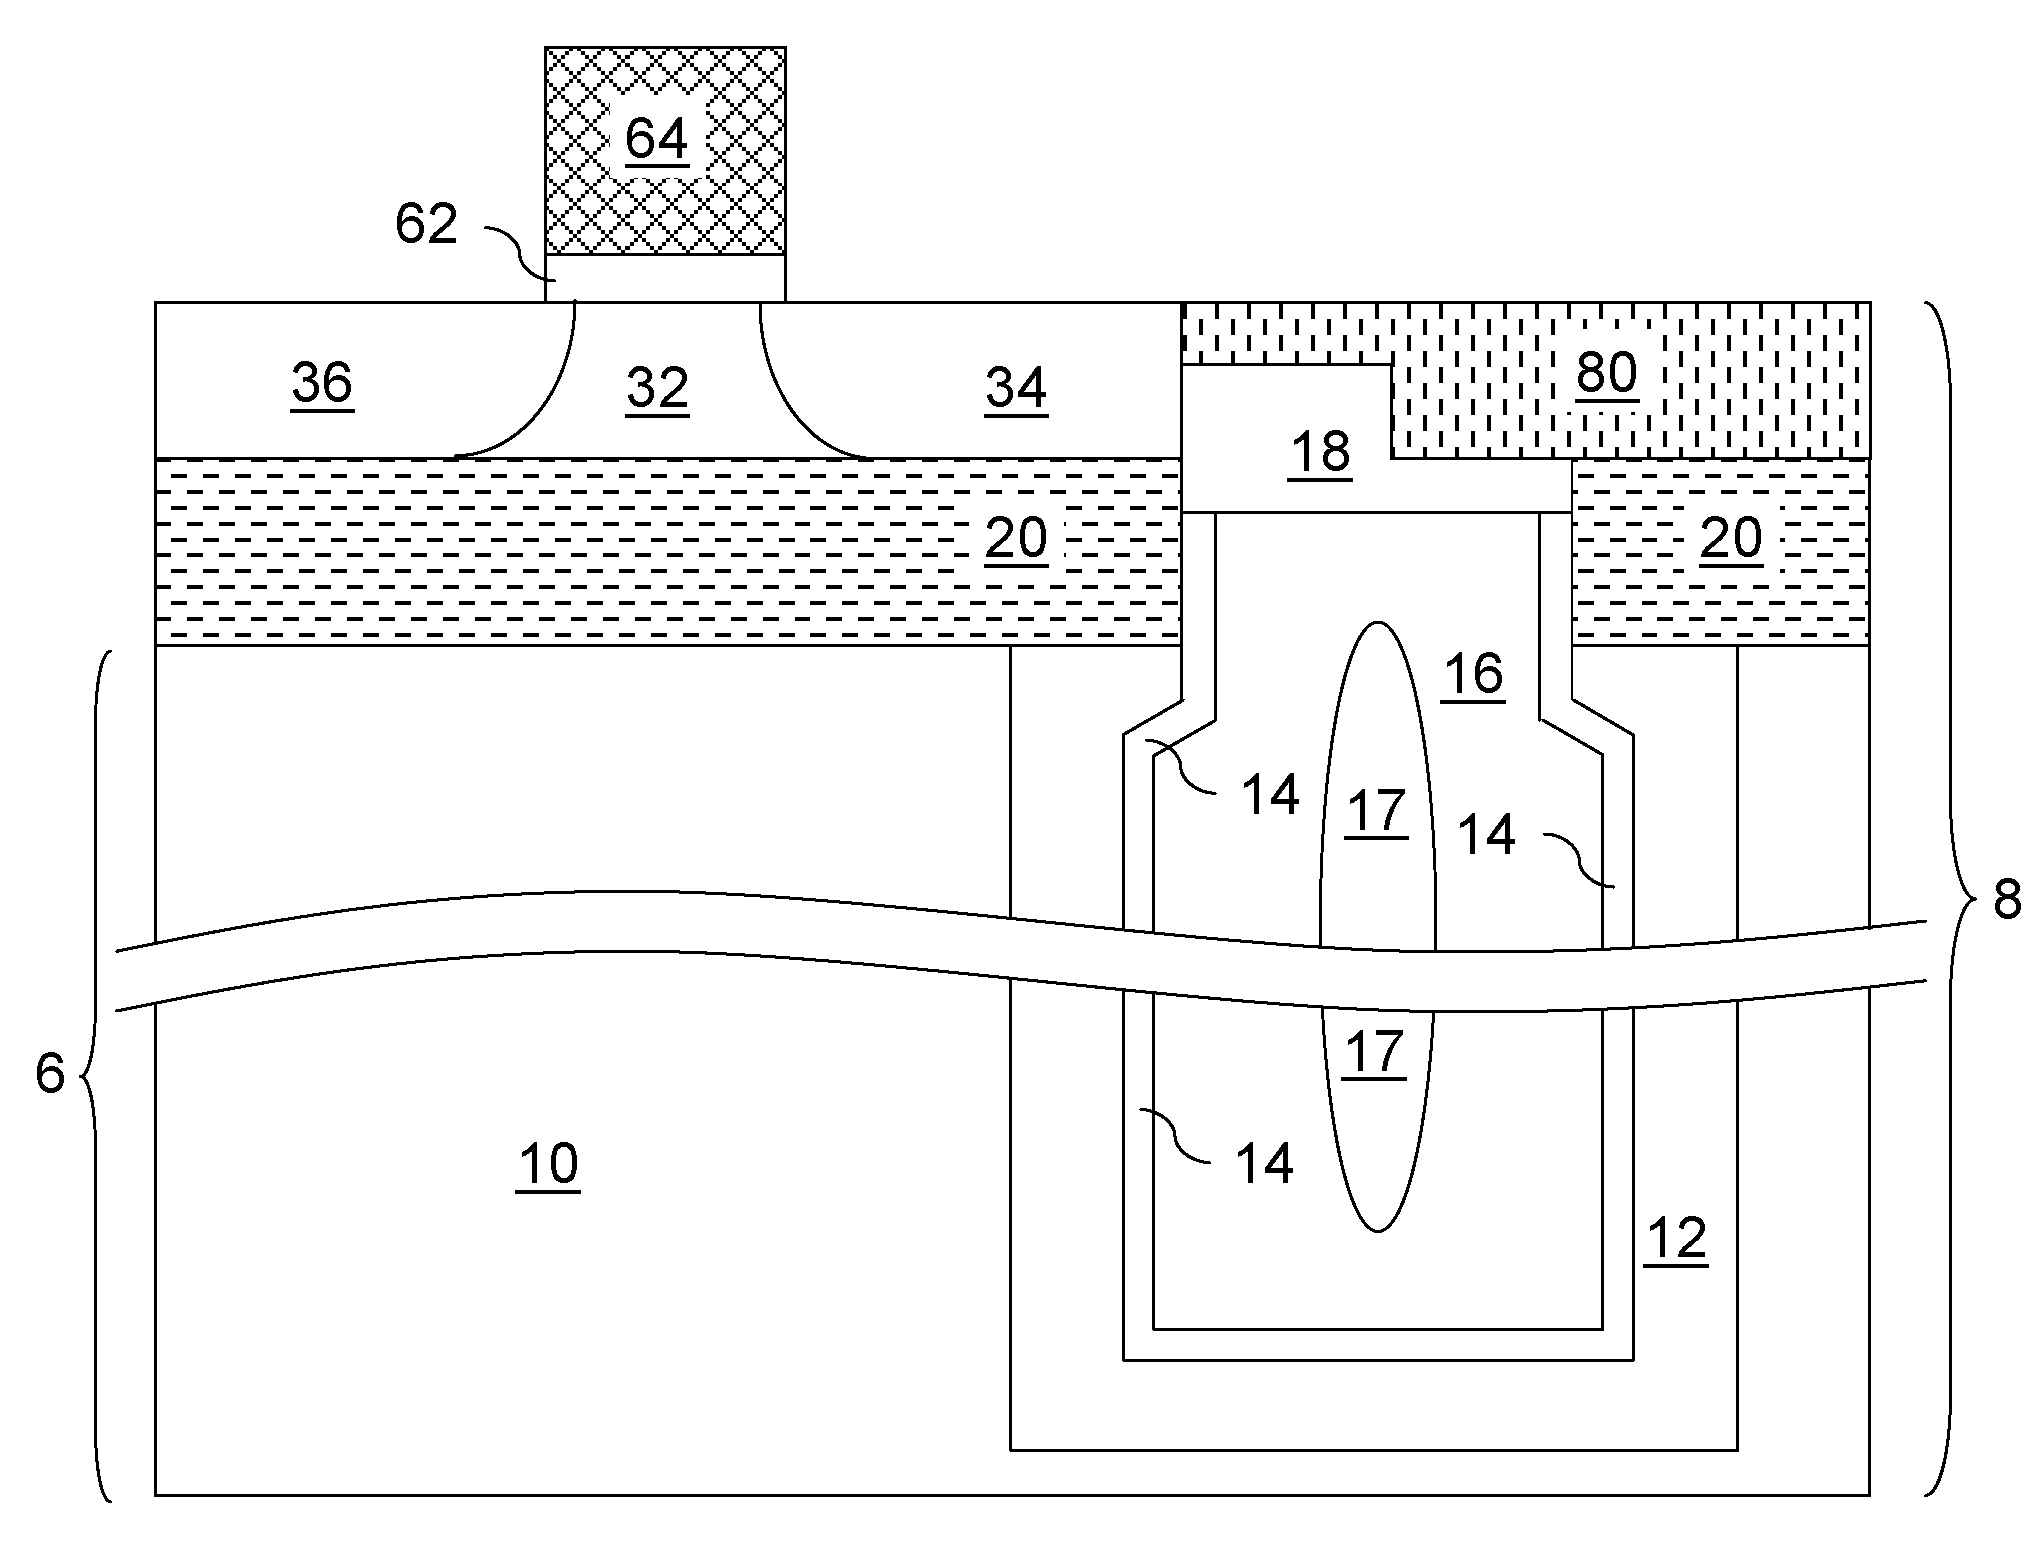 Soi deep trench capacitor employing a non-conformal inner spacer